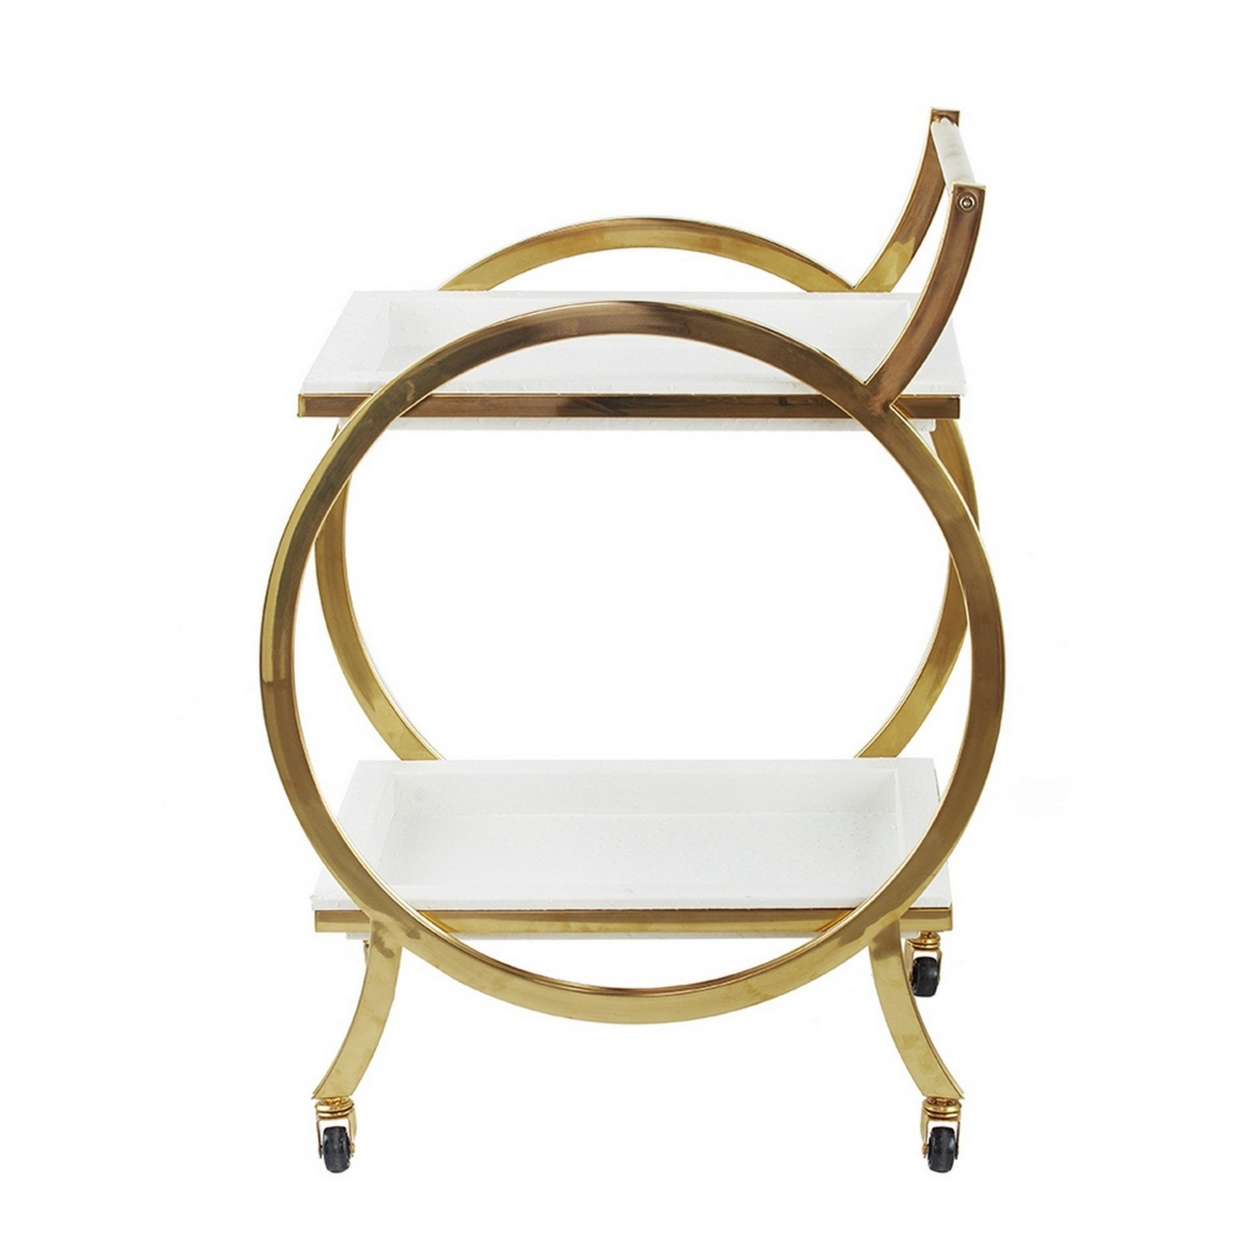 Sia 34 Inch Rolling Bar Cart, Round Steel Frame, Removable Trays White Gold, Saltoro Sherpi